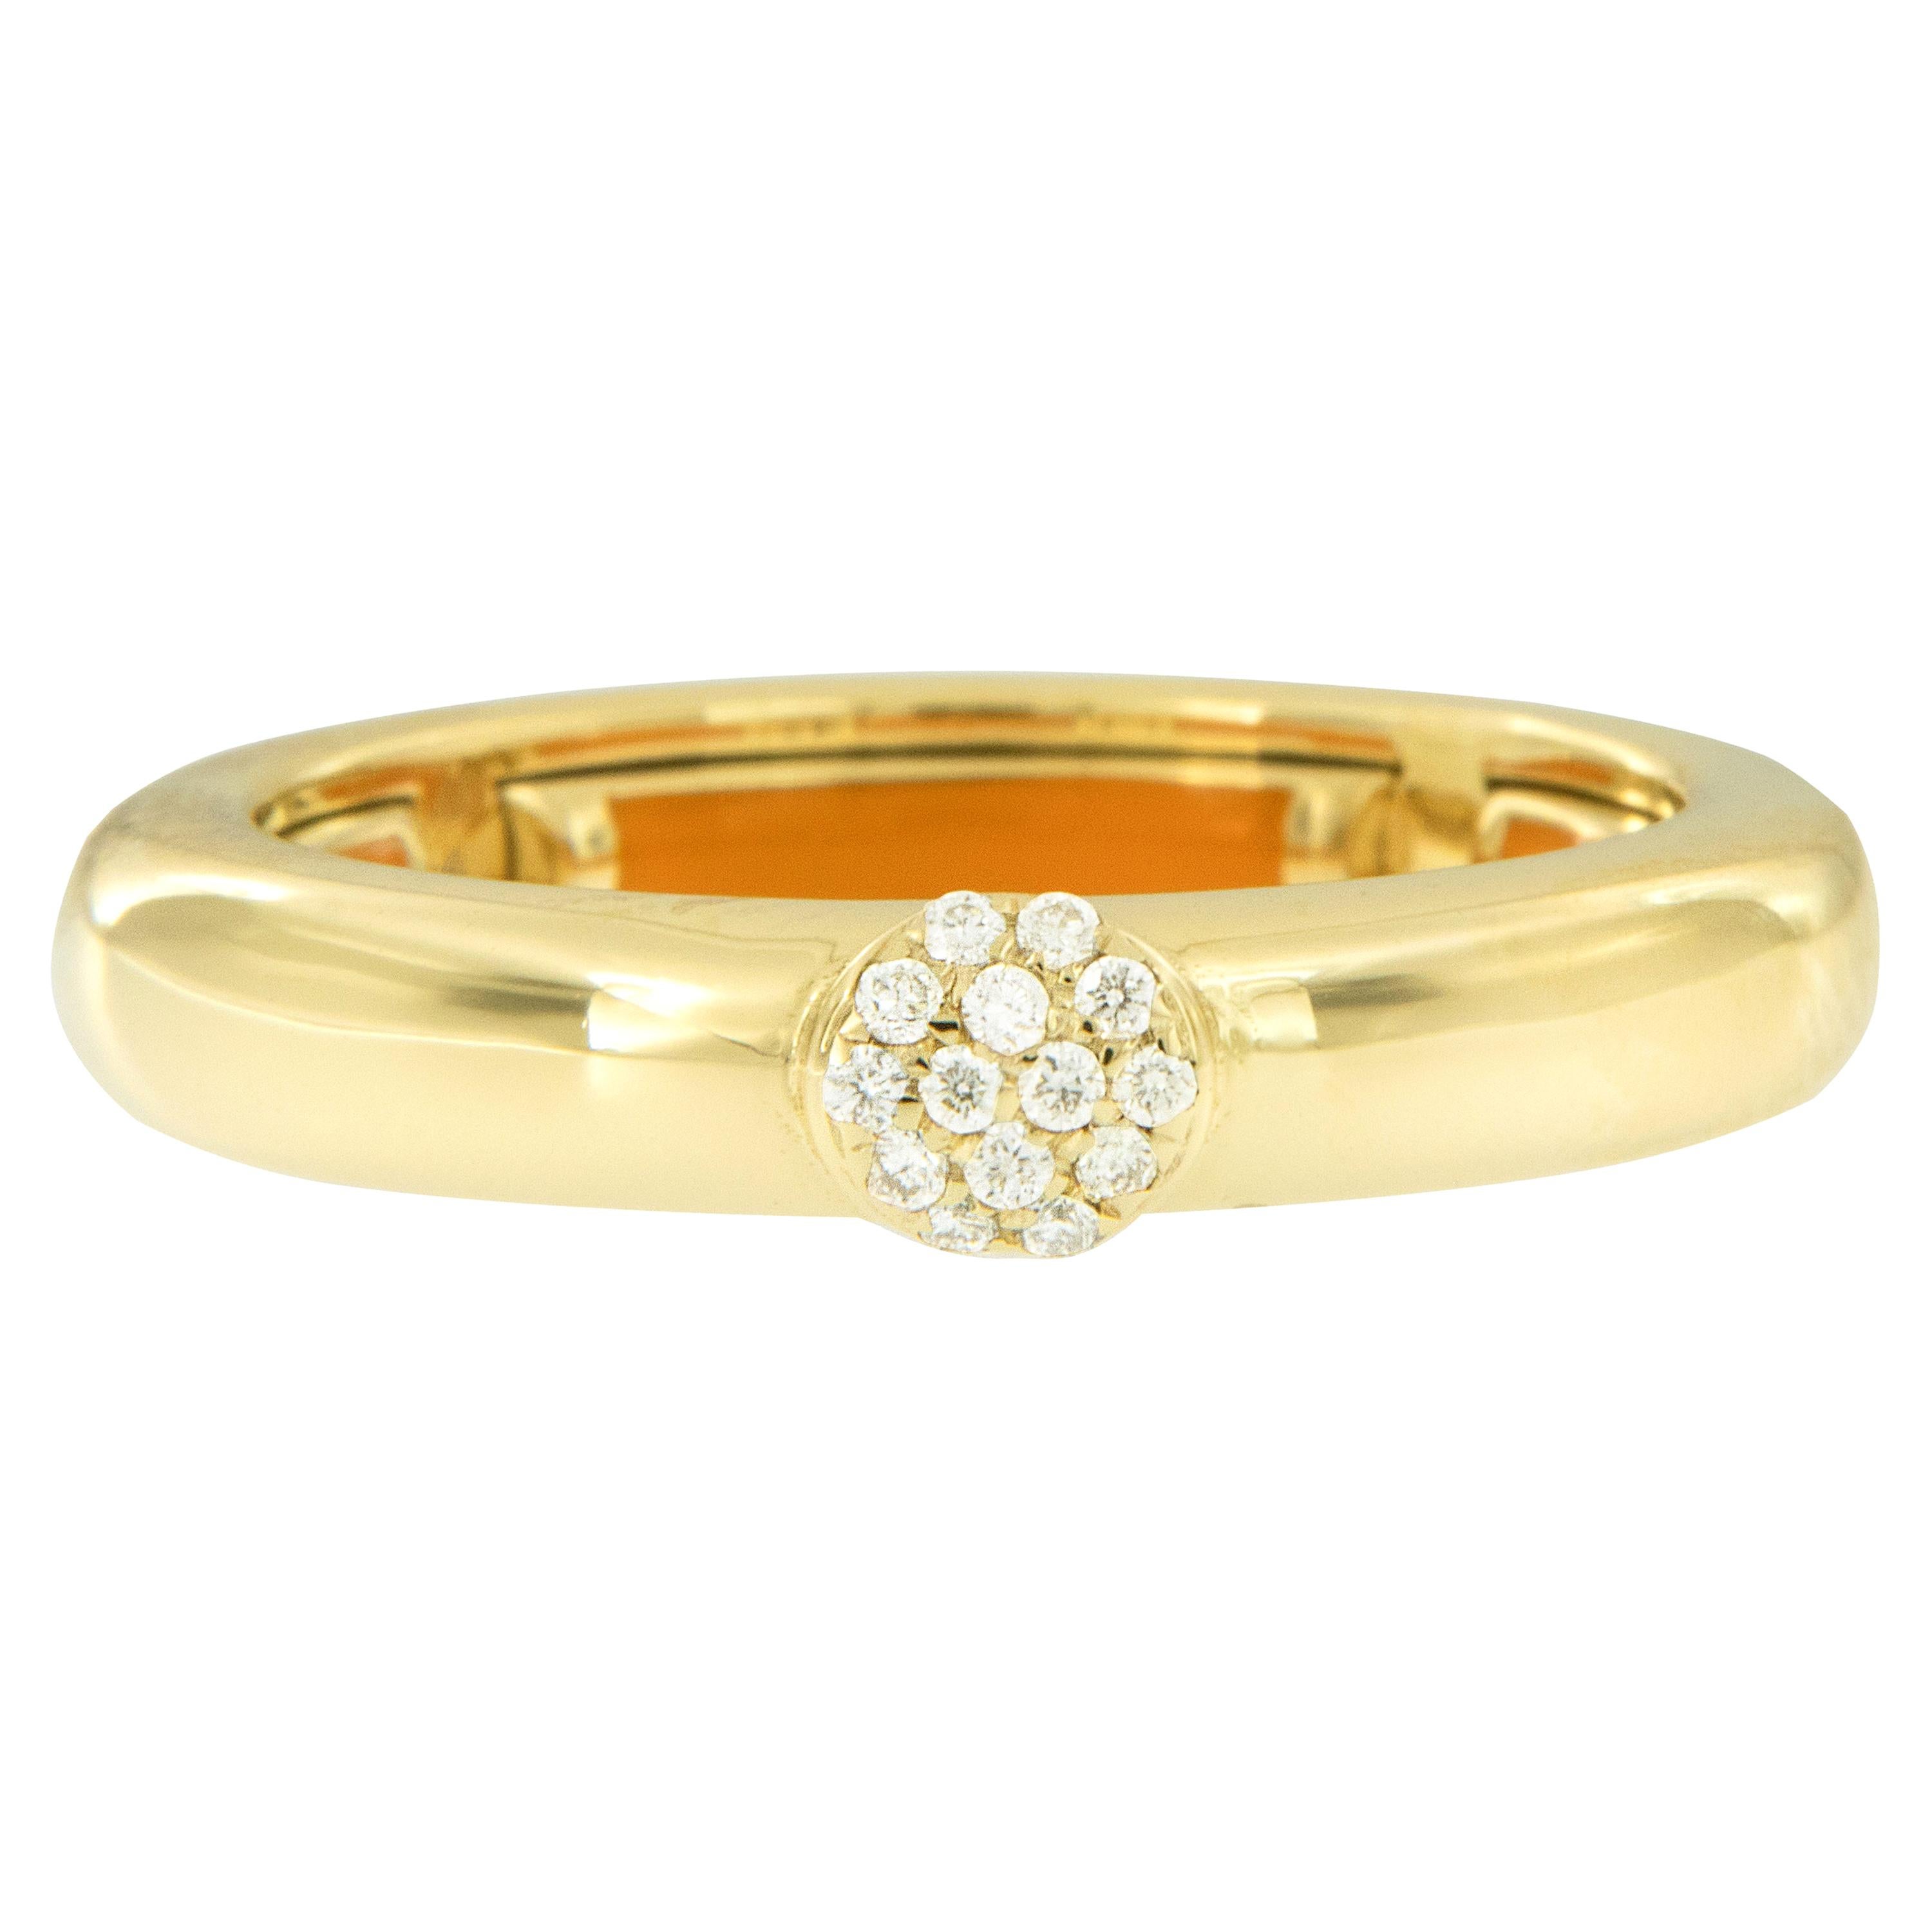 18 Karat Yellow Gold and Diamond Adjustable Ring Made in Italy For Sale